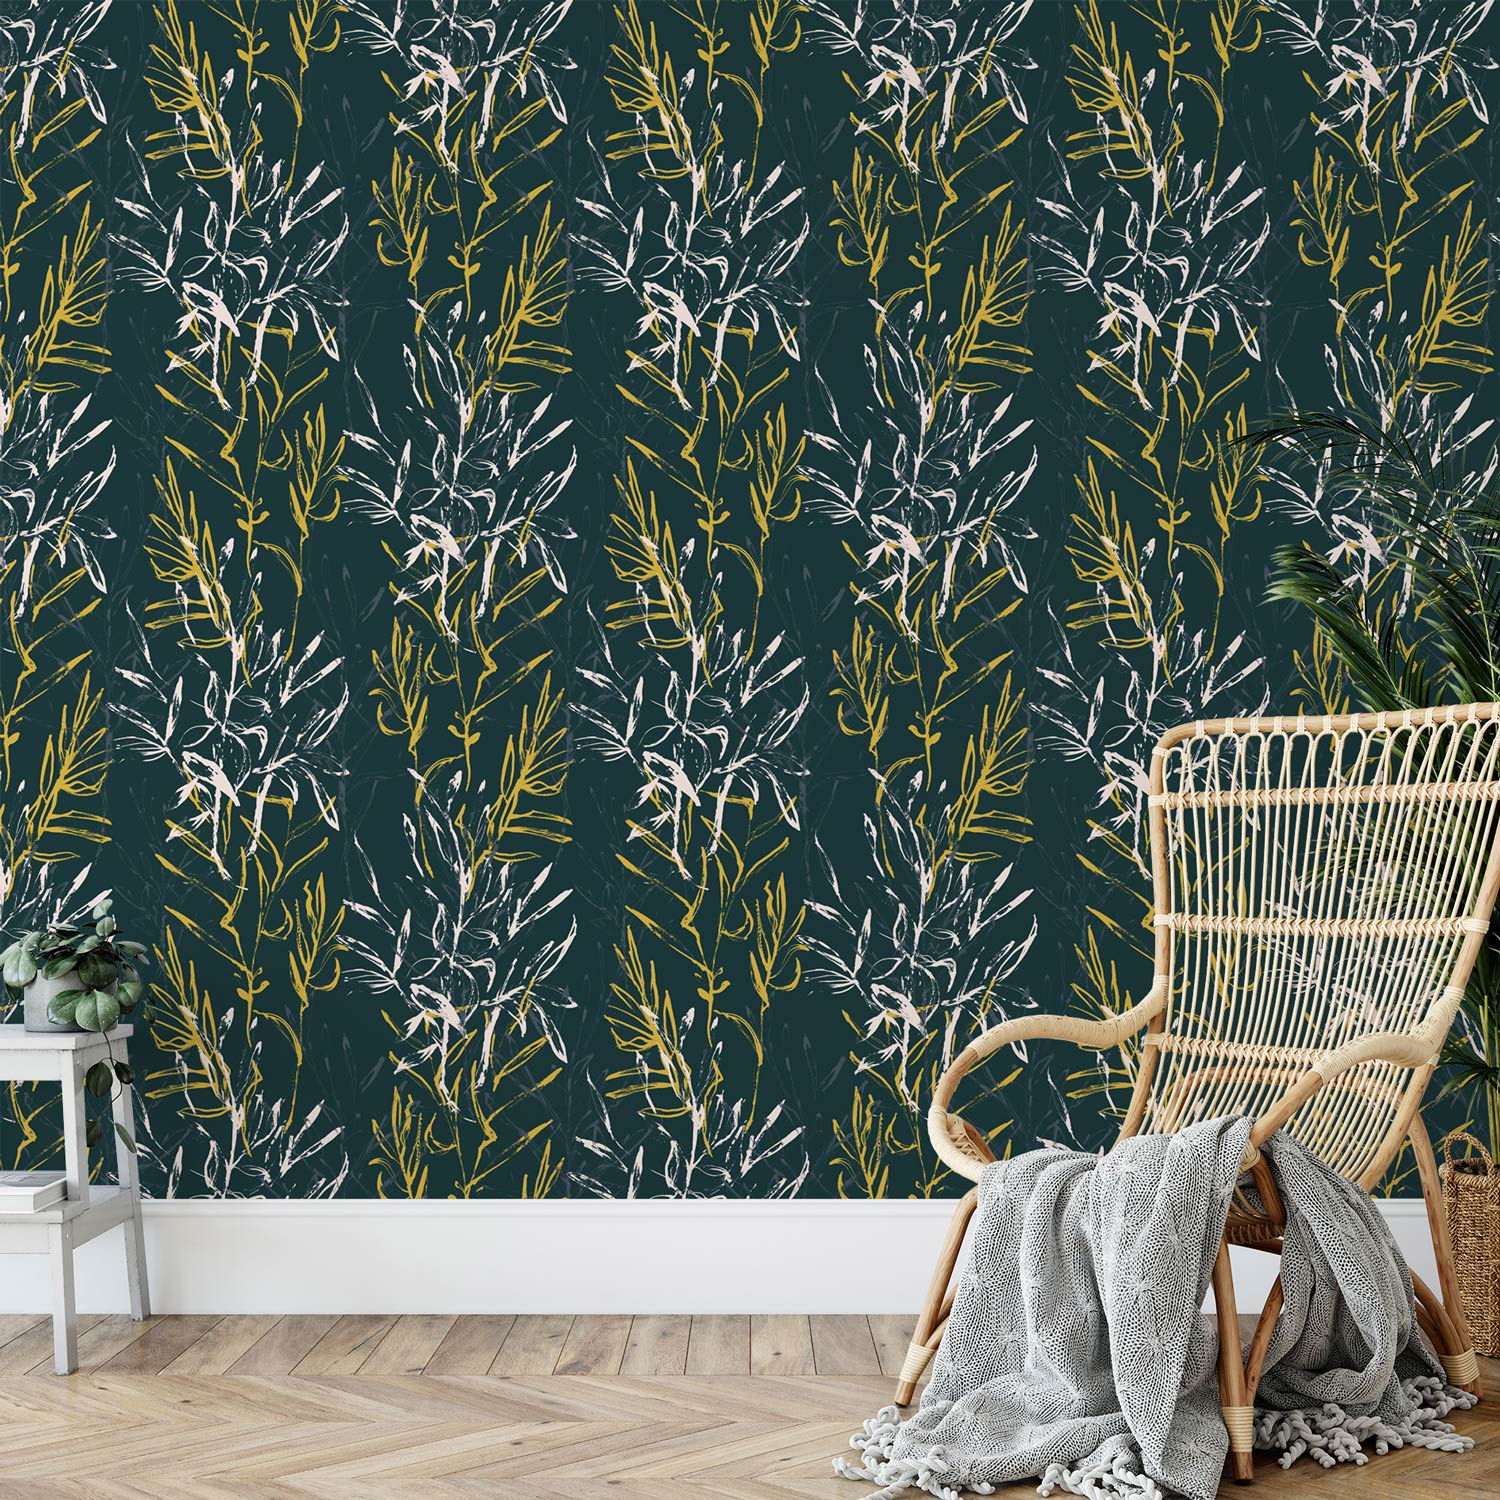 Wild Willow Wallpaper - Bring the outdoors in with Naruse Design